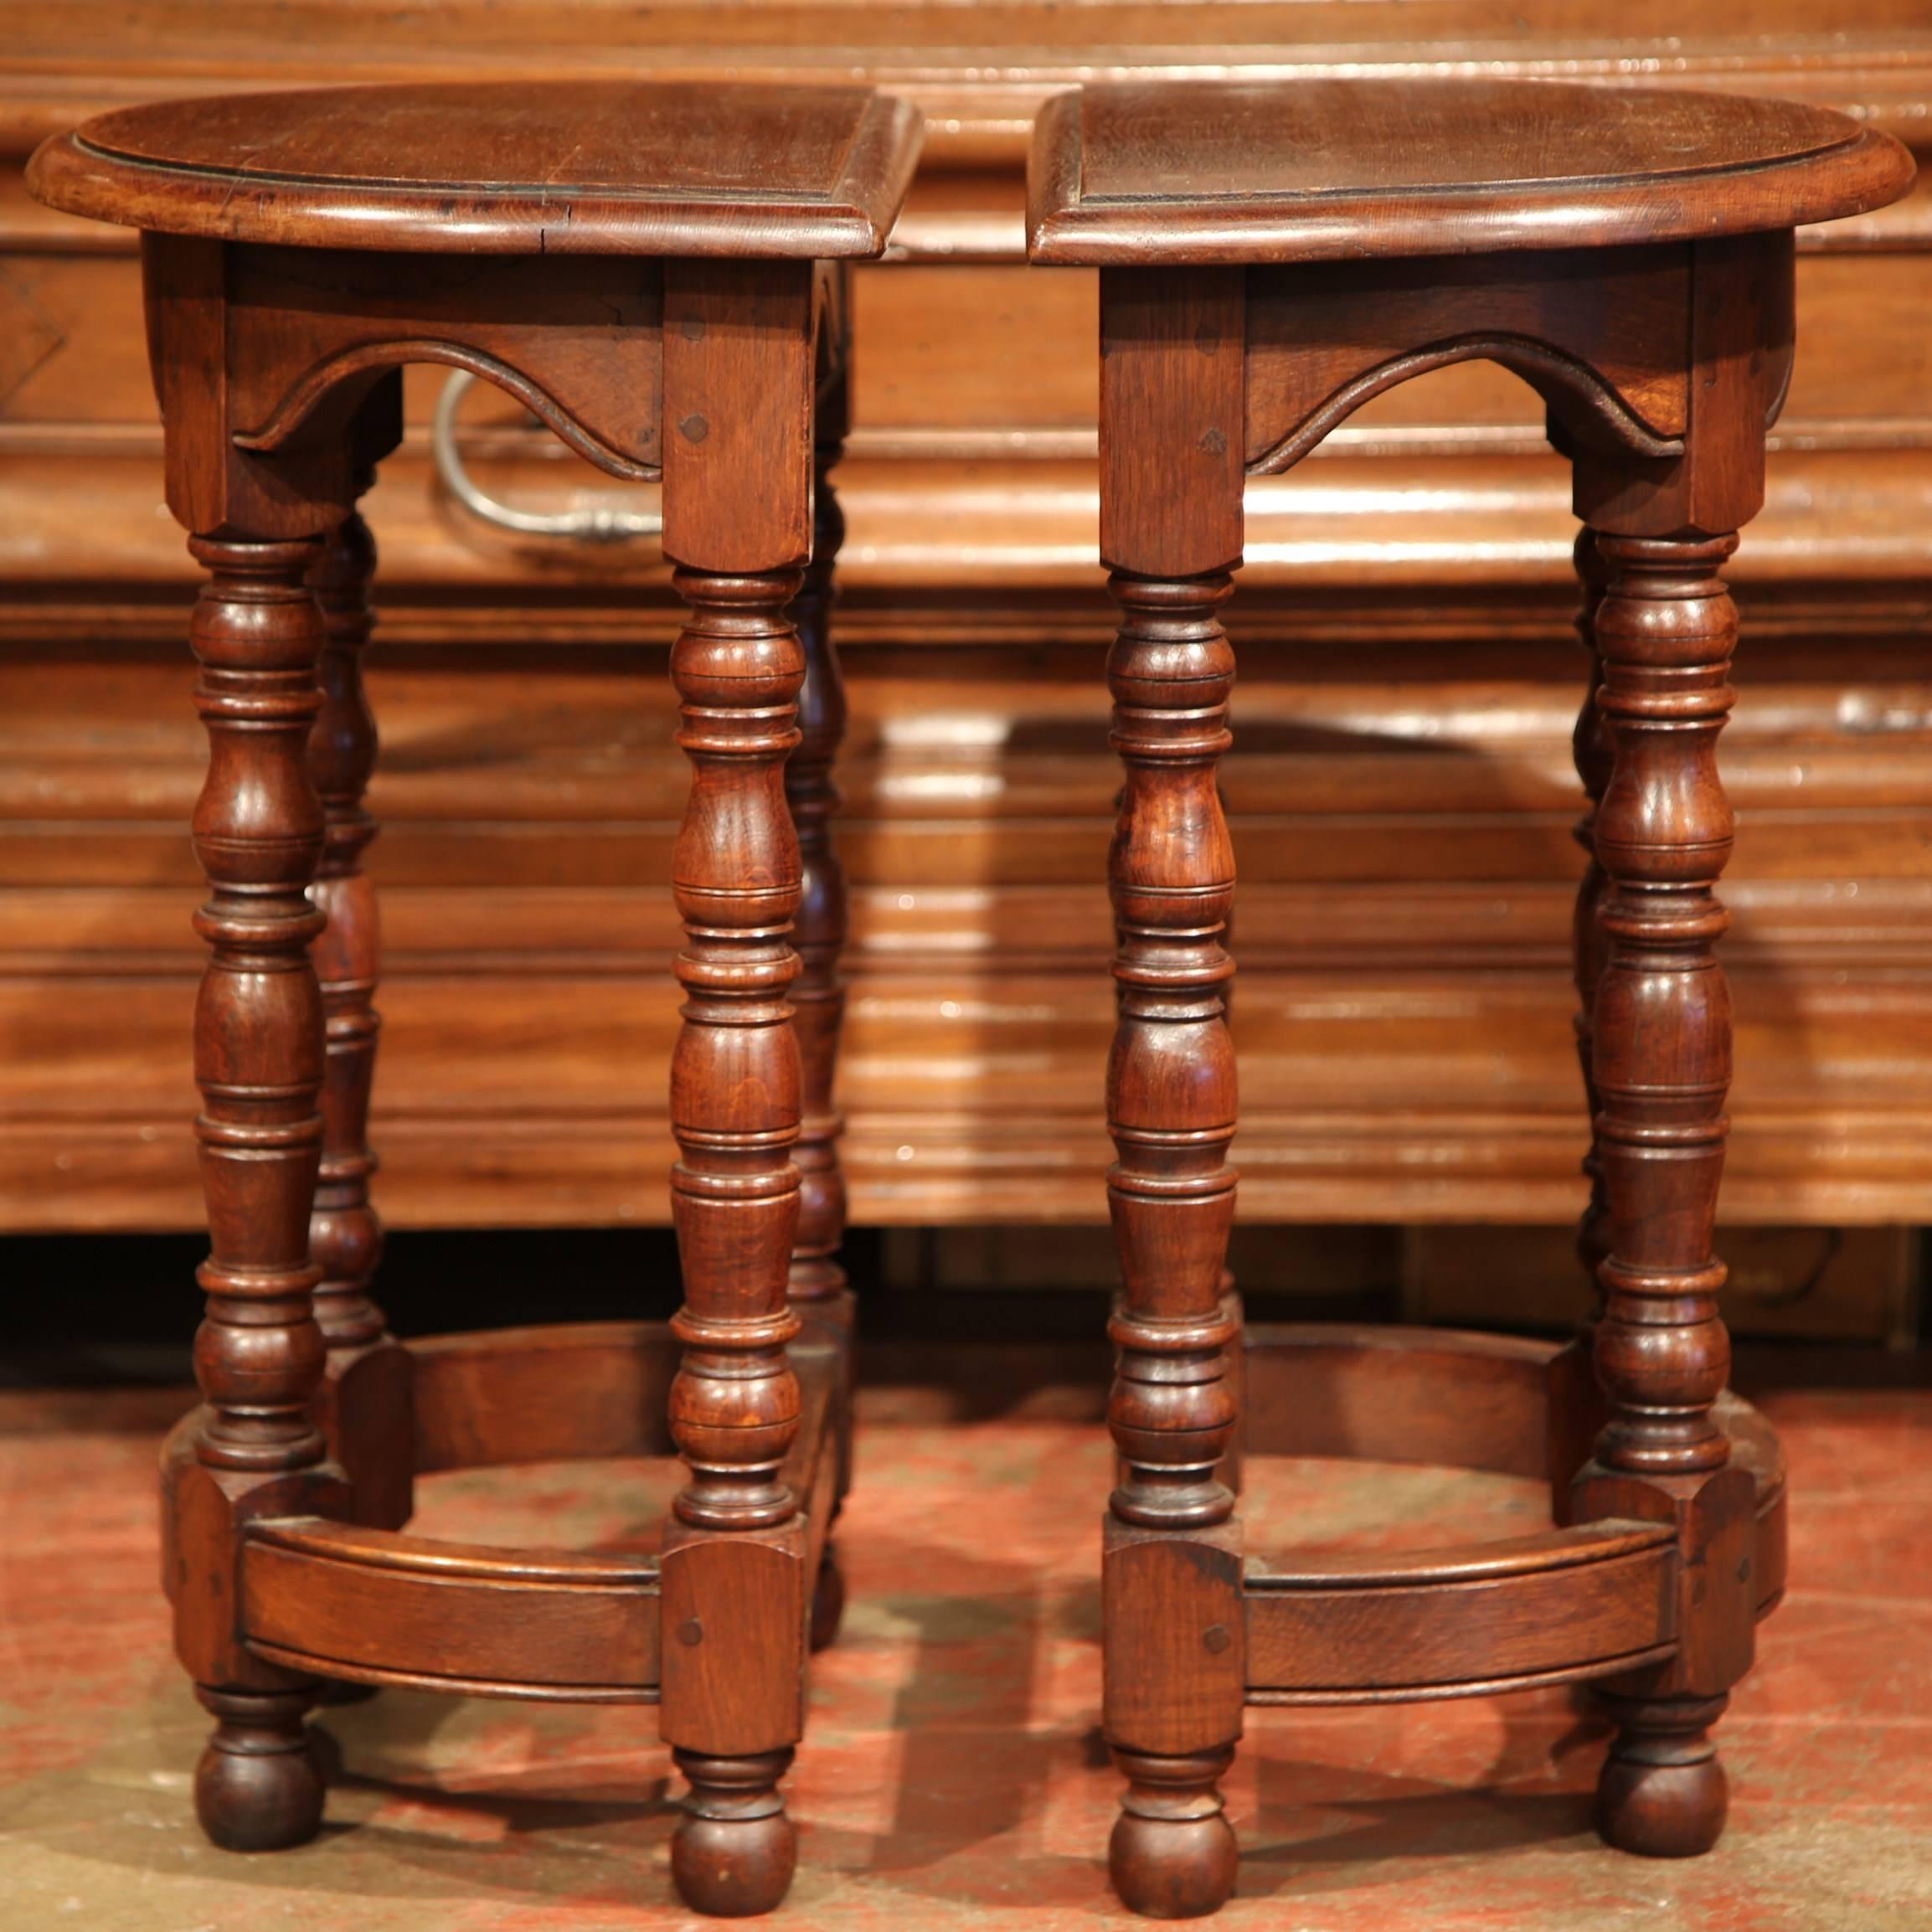 Hand-Carved Pair of Mid-20th Century Carved Walnut Demilune Side Tables with Turned Legs